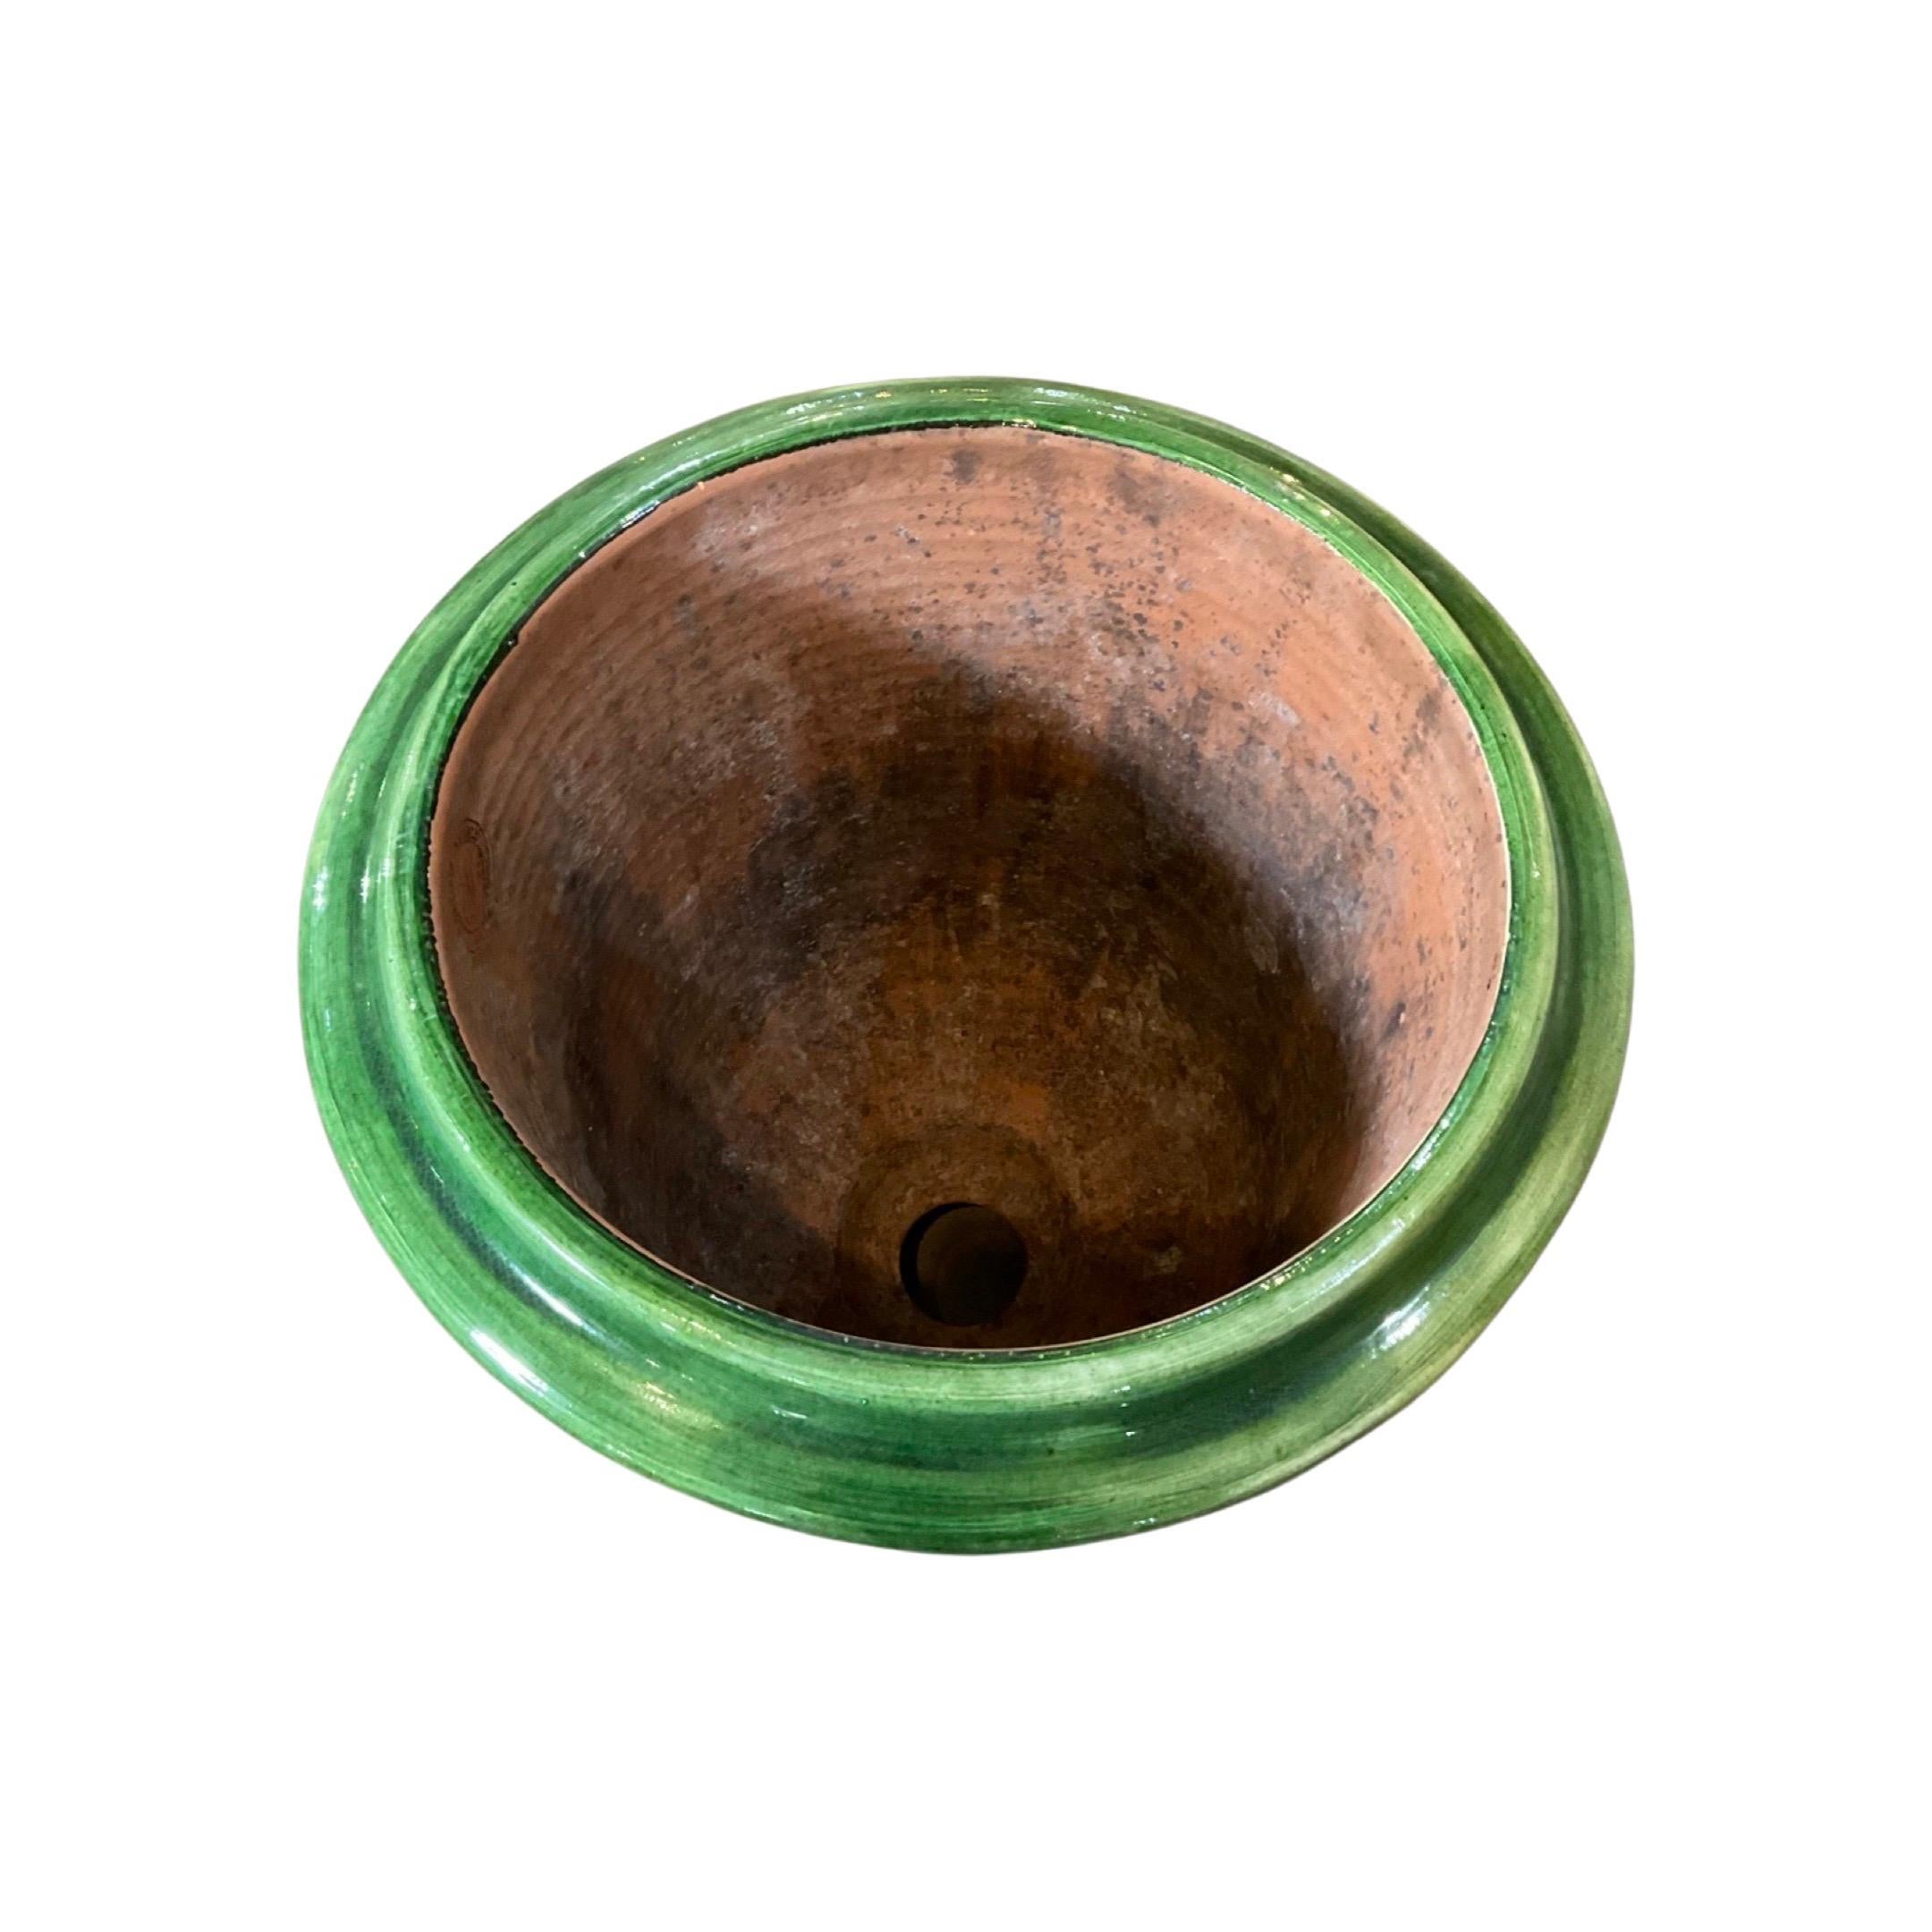 This terracotta French Anduze Planter, dating back to the 18th century, features beautiful green detailing and a timeless anduze design. A must-have for any gardening expert, this planter adds an air of refinement and historical significance to your